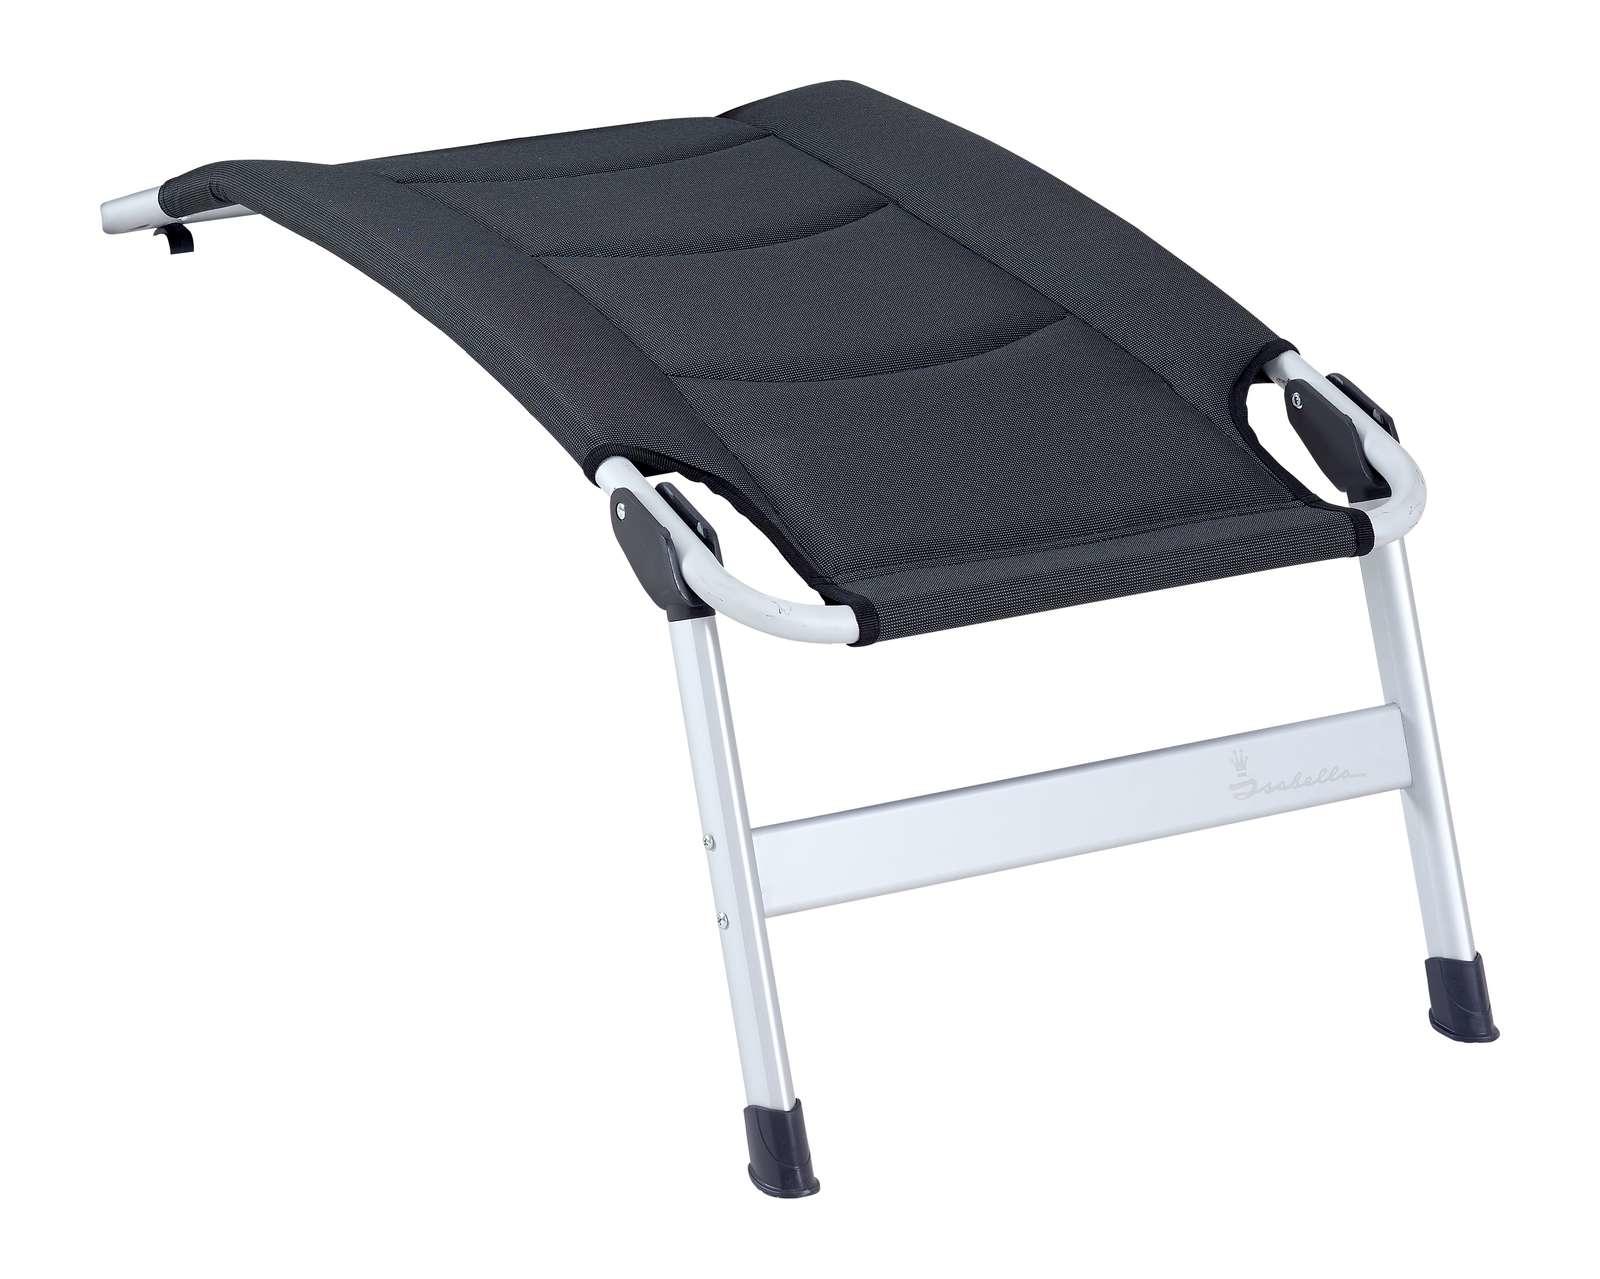 isabella footrest for camping chair - dark grey